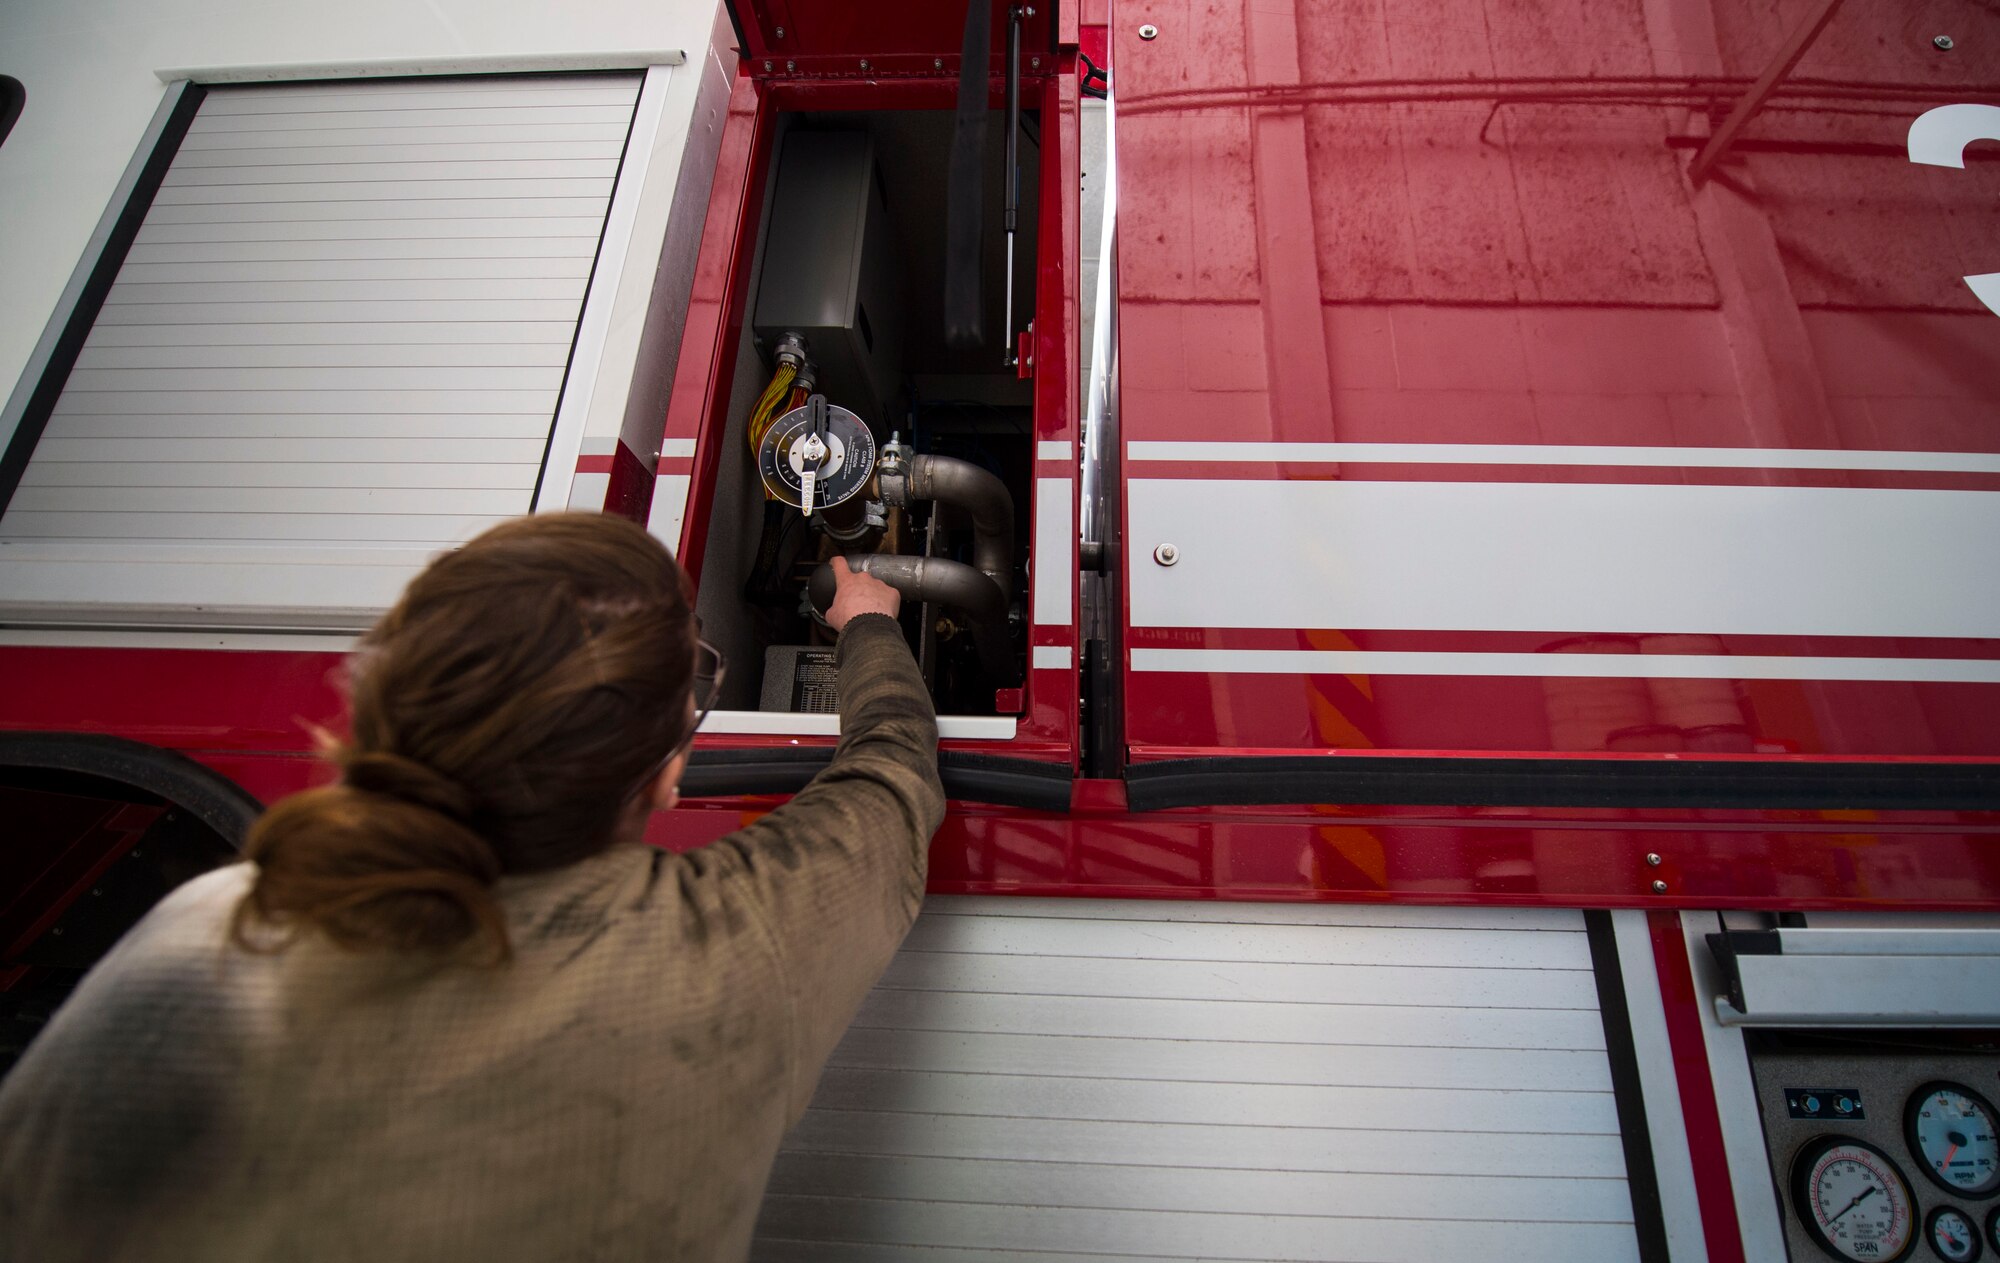 Senior Airman Nicole Franklin, 424th Air Base Squadron special vehicle mechanic, inspects the no-foam system on a Striker 1500 firetruck at Chièvres Air Base, Belgium, Feb. 26, 2016. Airmen with the 424th ABS provide airfield operations support for the Supreme Allied Commander Europe and Supreme Headquarters Allied Powers Europe (SHAPE), NATO transient aircraft and distinguished visitors. (U.S. Air Force photo/Staff Sgt. Sara Keller)